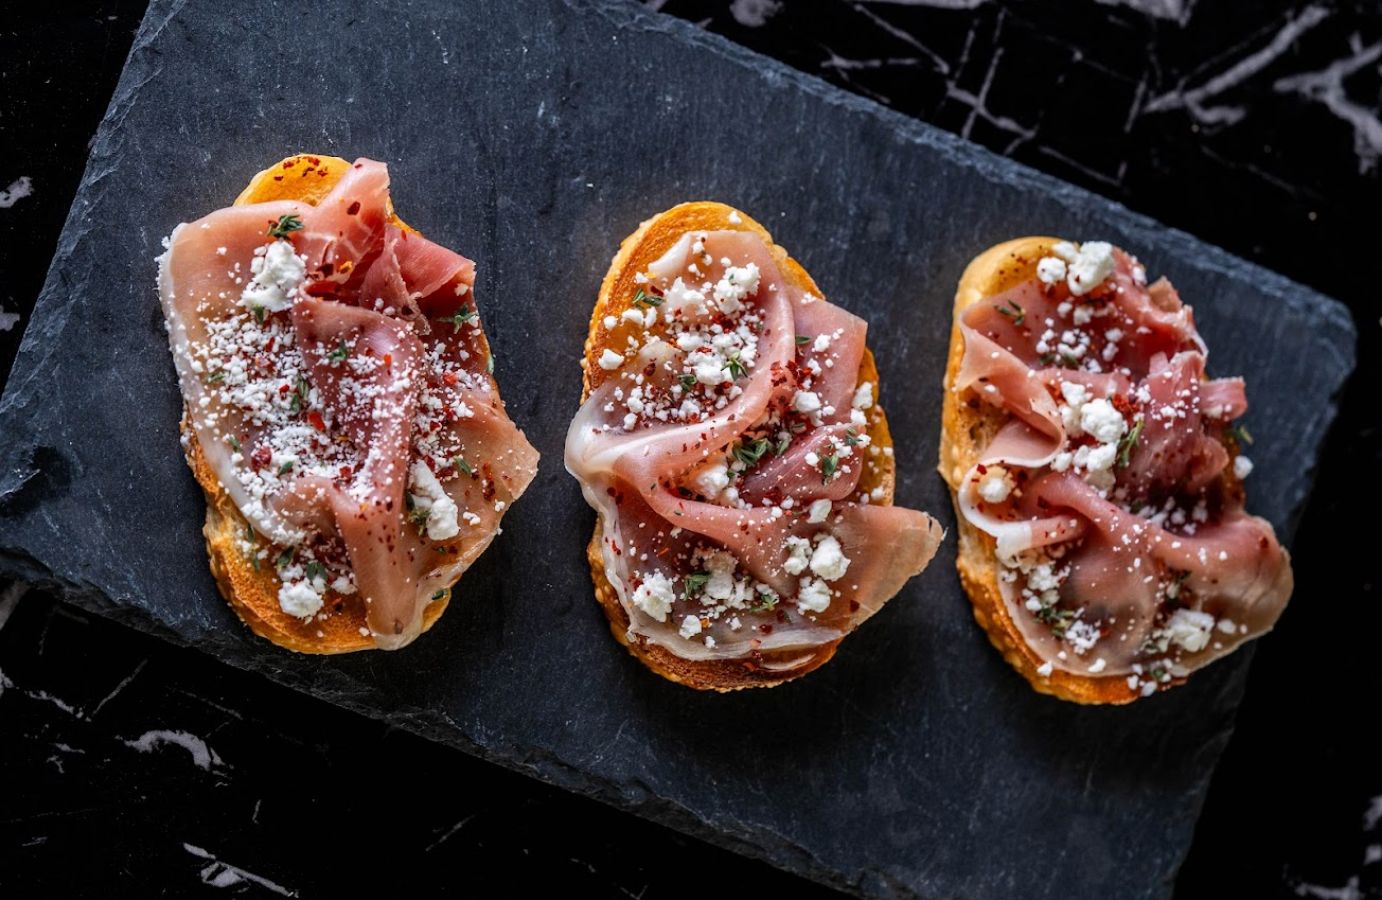 Top view of three fig and prosciutto sandwiches